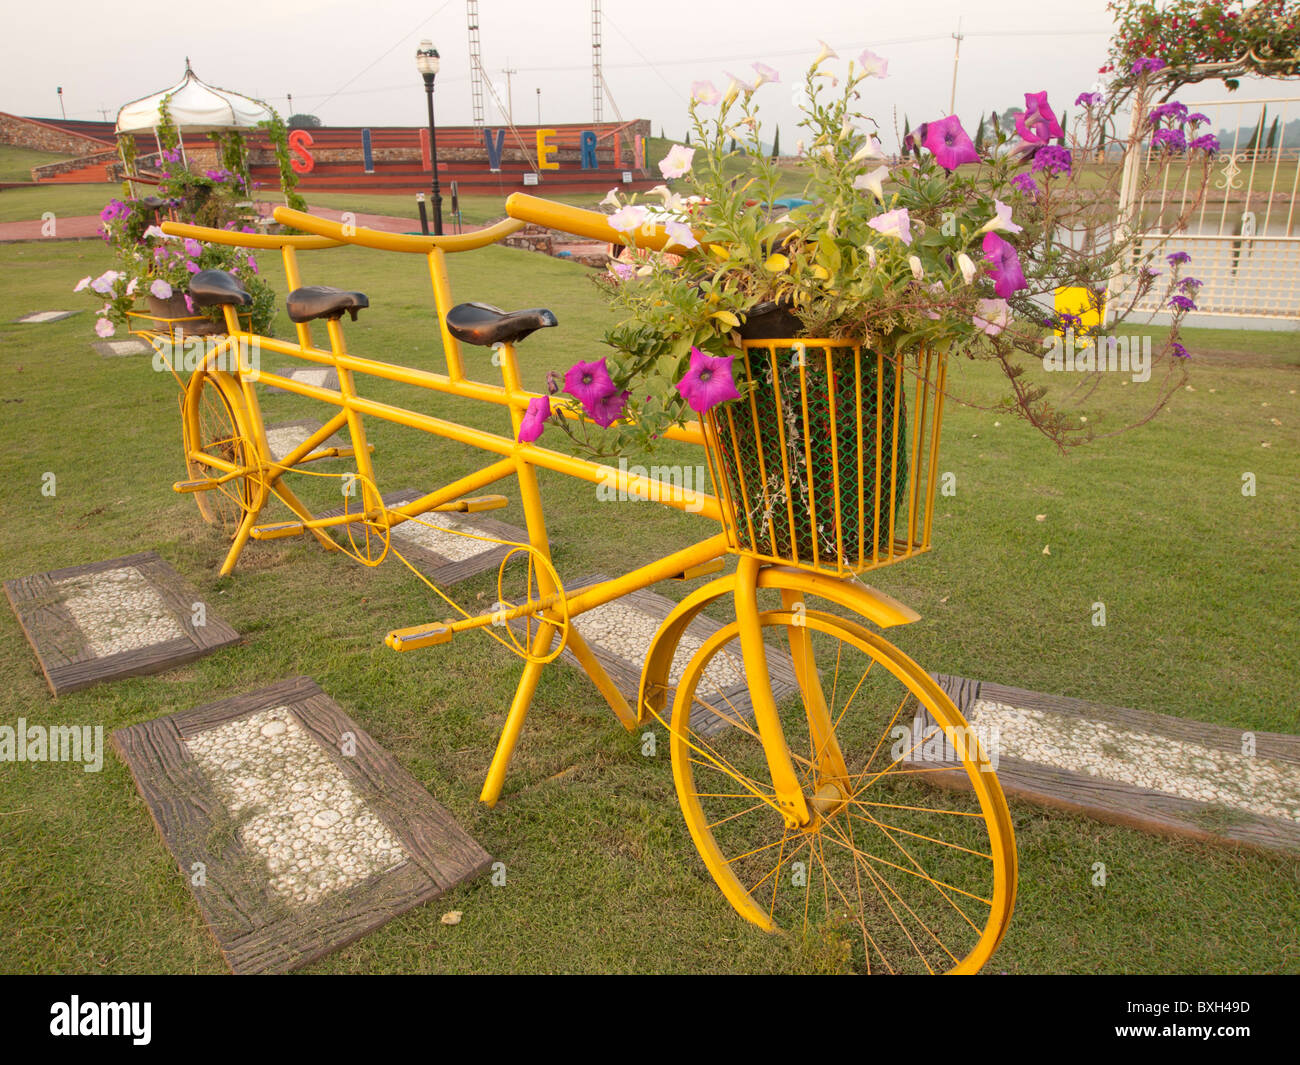 A yellow 3 seats bicycle is a garden decoration with flower pot on the basket Stock Photo